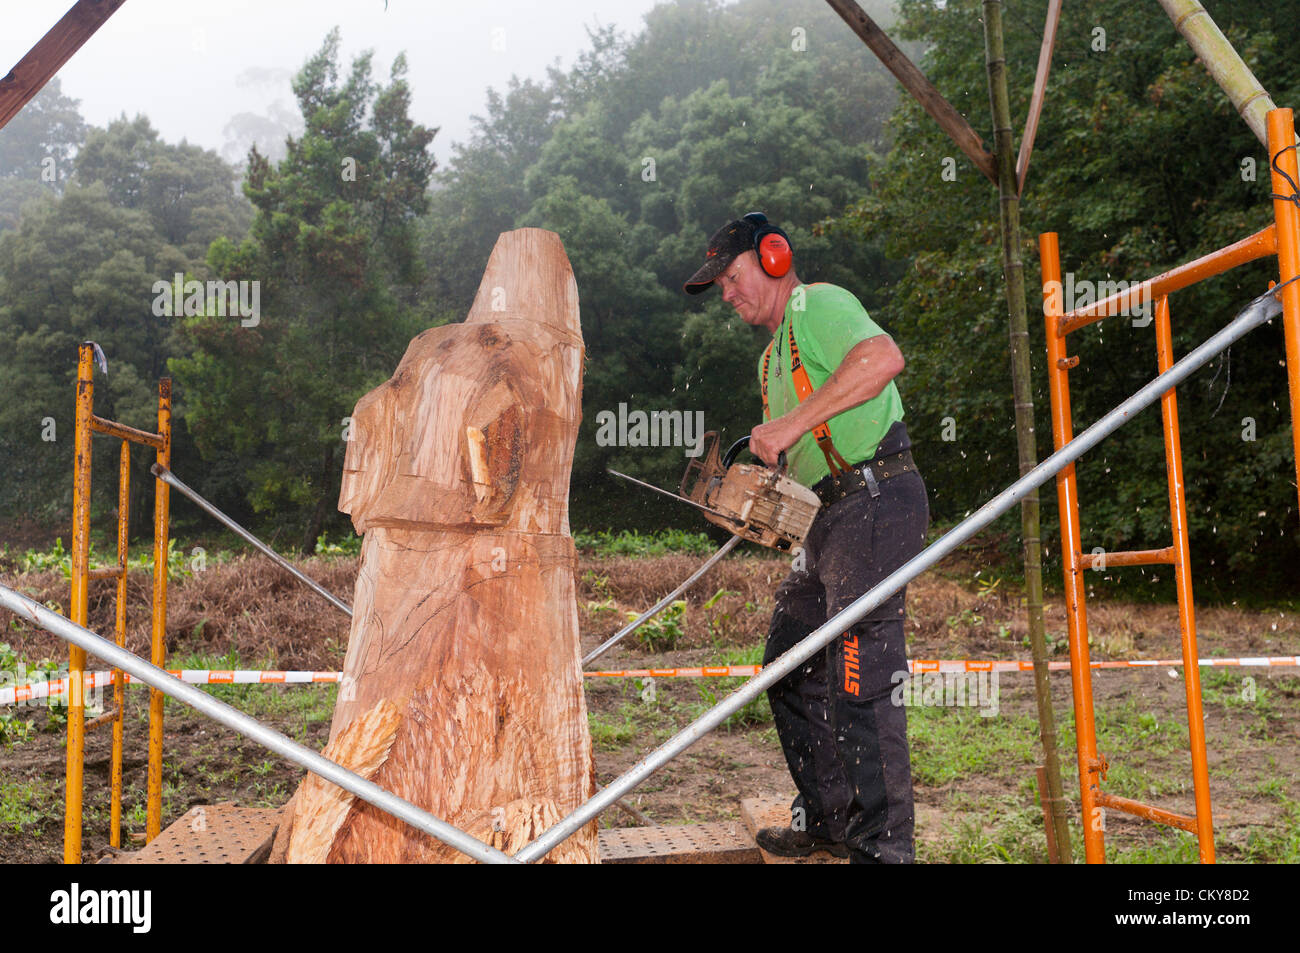 Emmanuel Courtot sponsored by STIHL etc doing wood carving from 27 August to 2 September 2012 Stock Photo